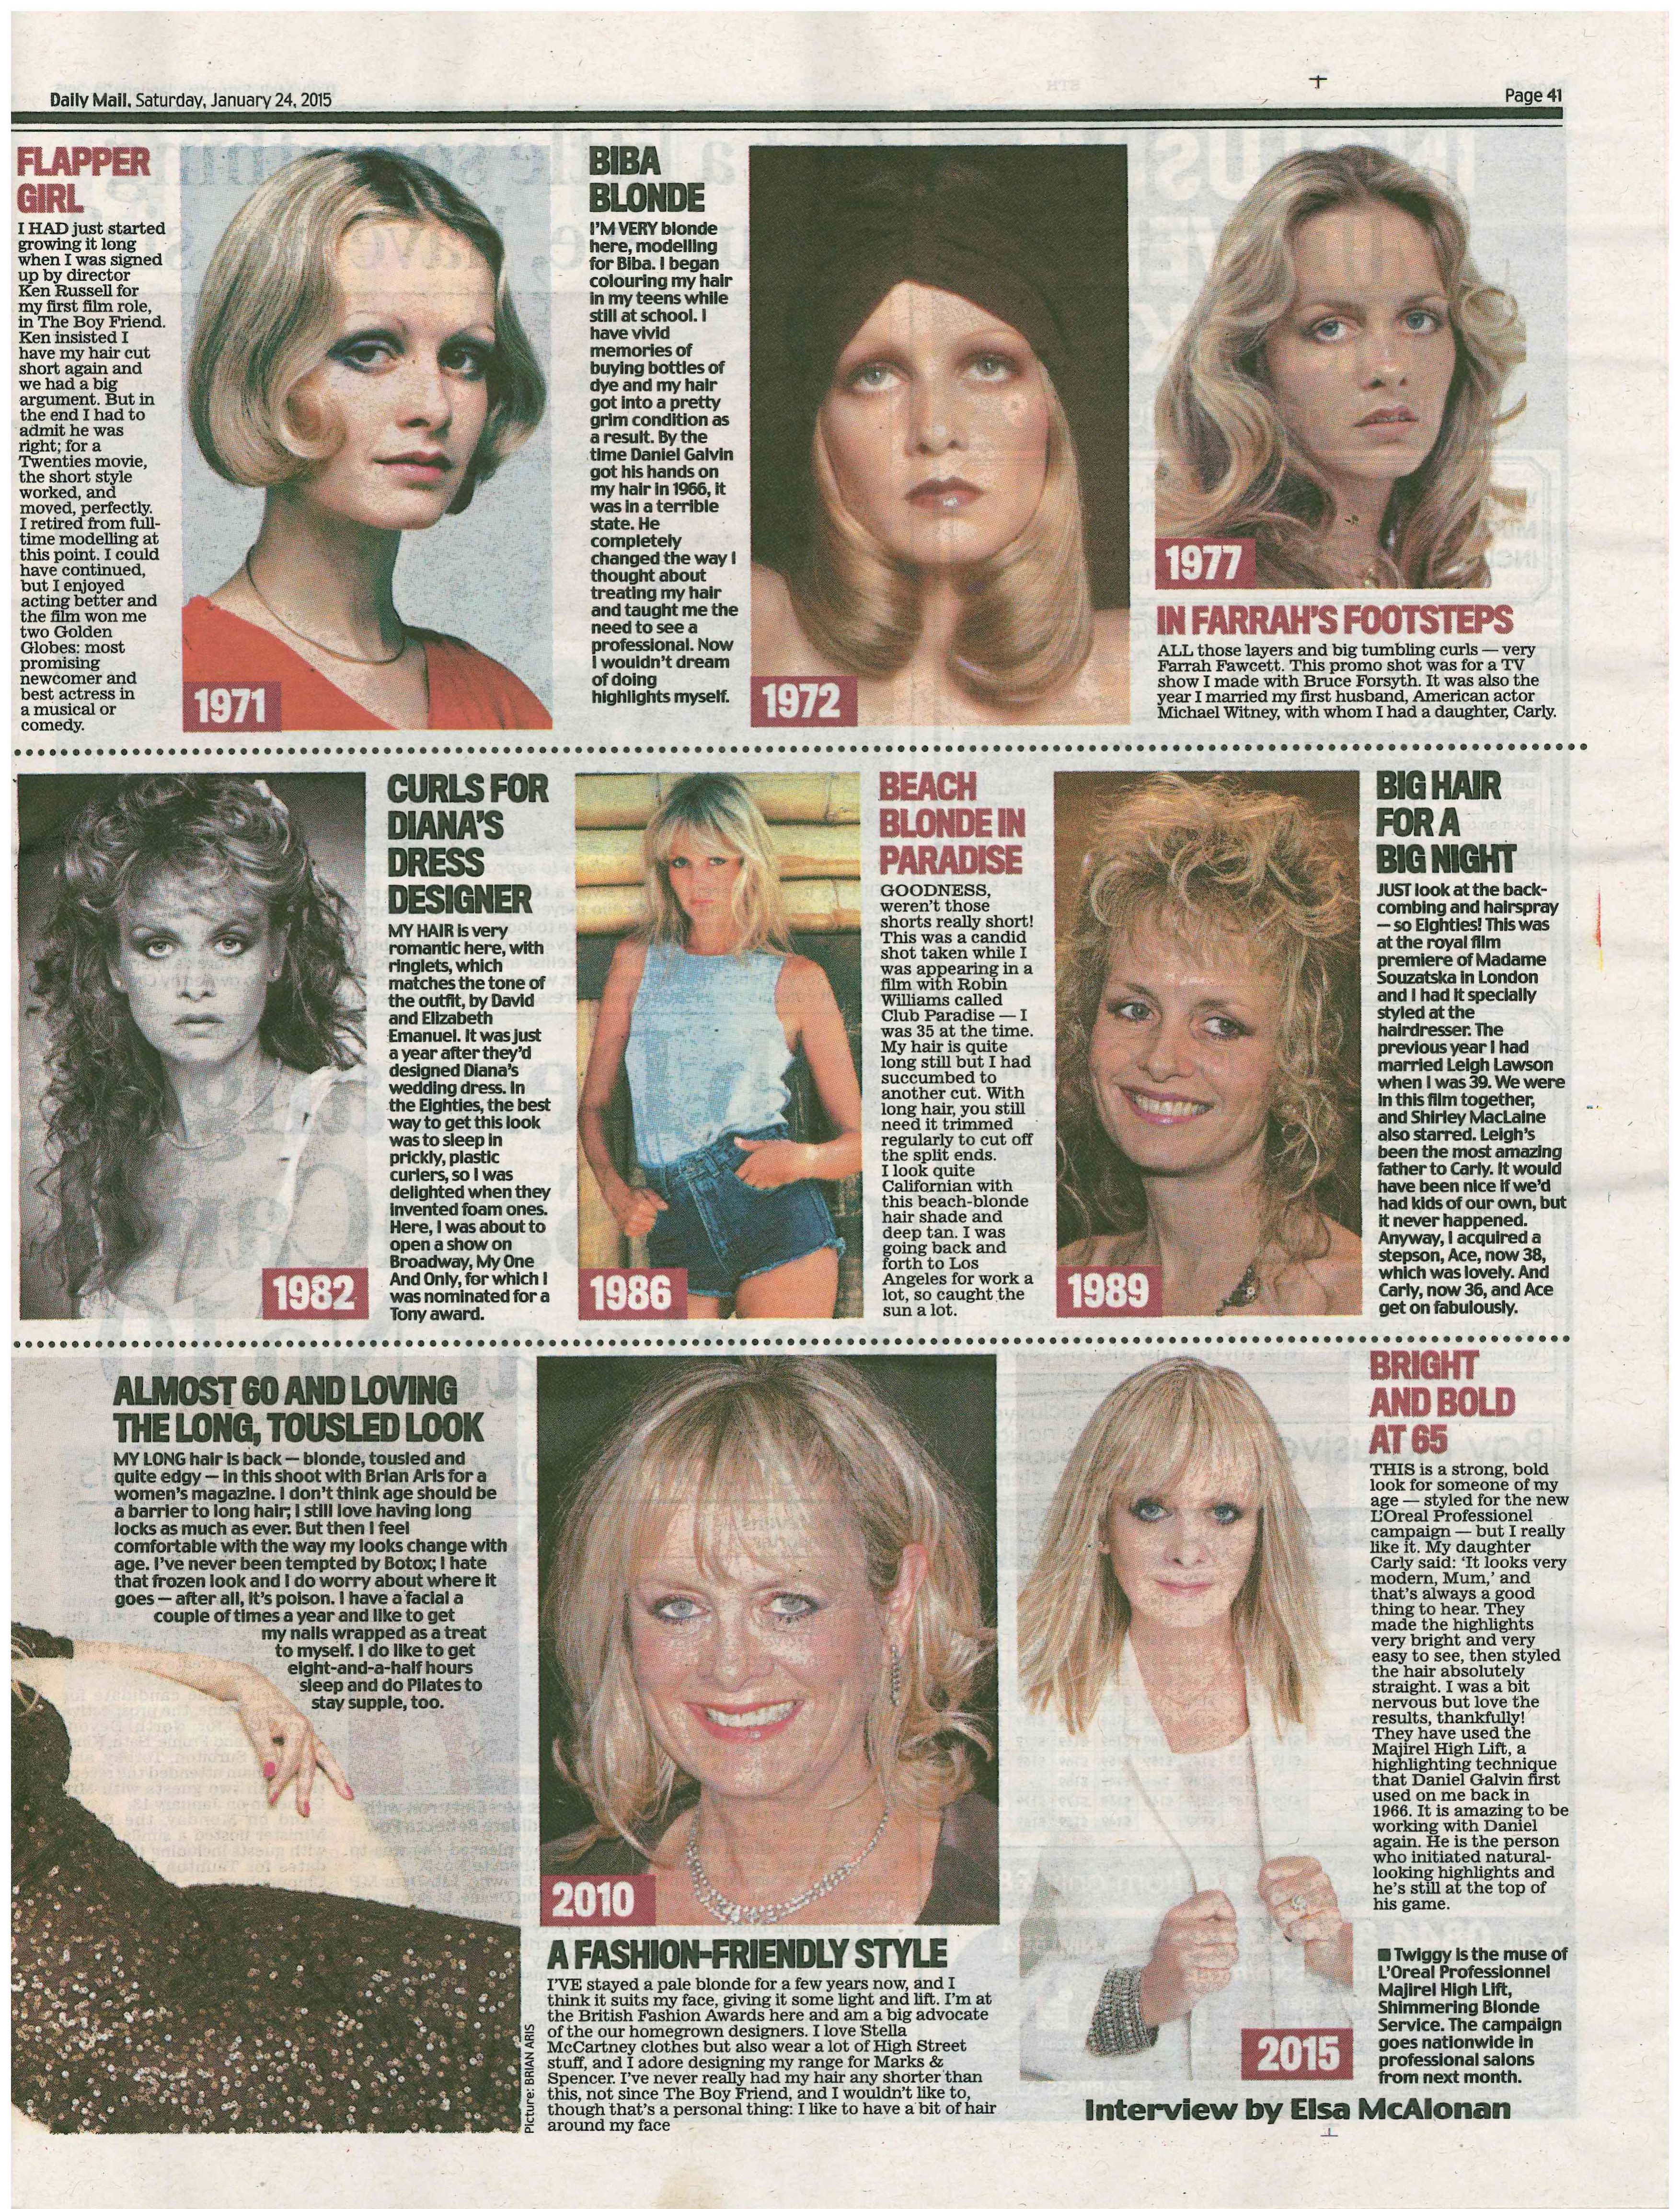 Daily Mail- 'My life in 15 hairstyles by TWIGGY' | Daniel Galvin